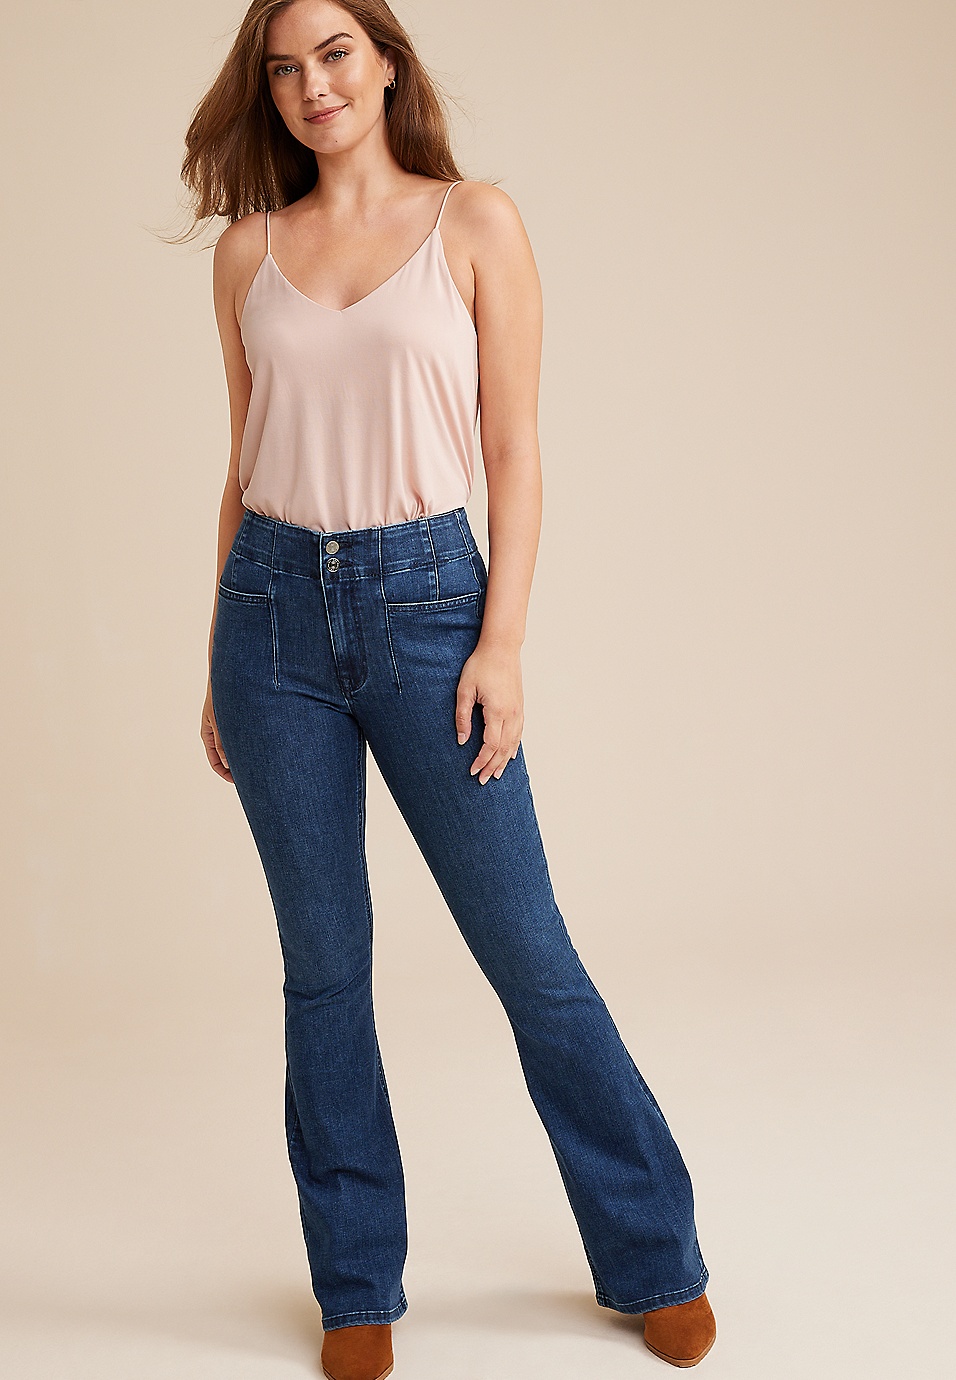 m jeans by maurices™ Cool Comfort Sculptress High Rise Flare Jean